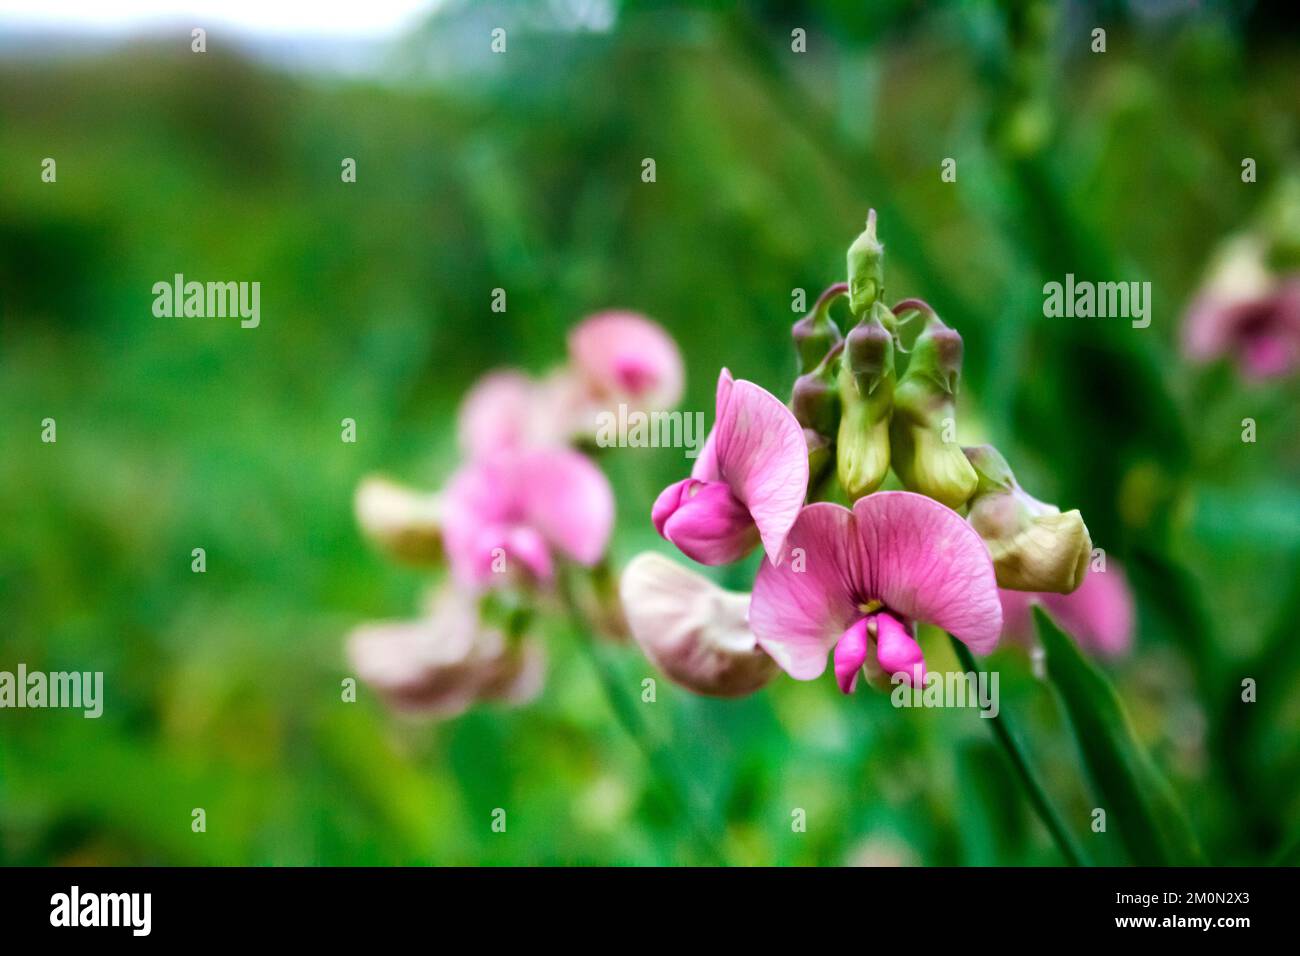 Lathyrus sylvestris, the flat pea or narrow-leaved everlasting-pea flowers on green meadow background Stock Photo